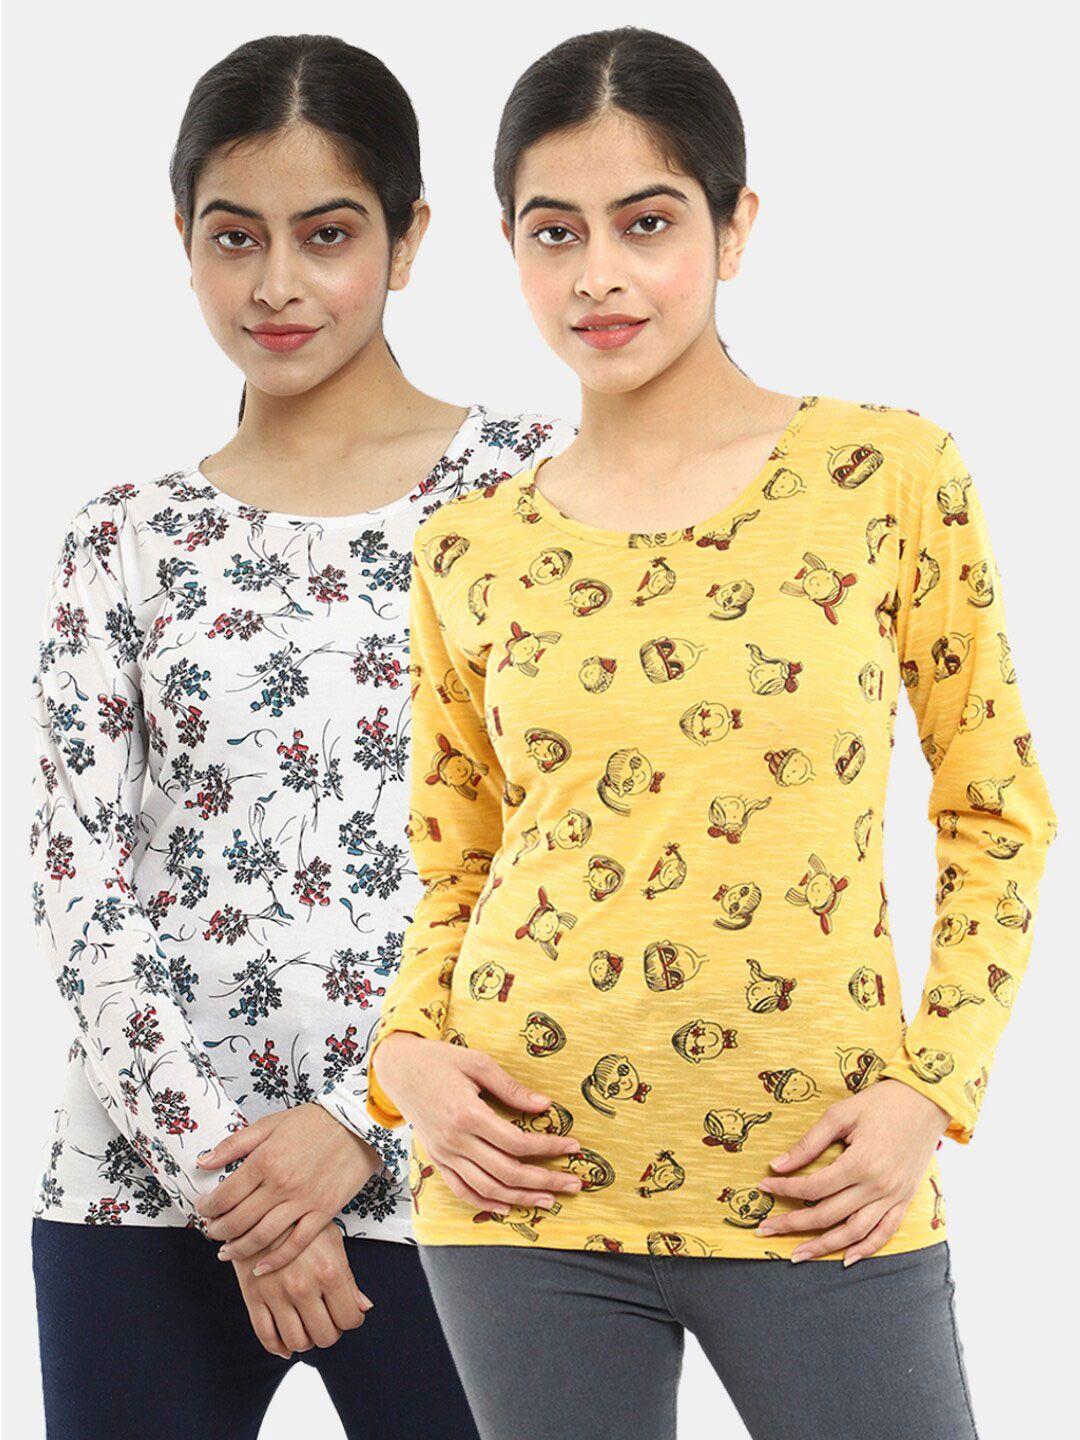 v-mart women western pack of 2 mustard, white printed  jersey round neck top